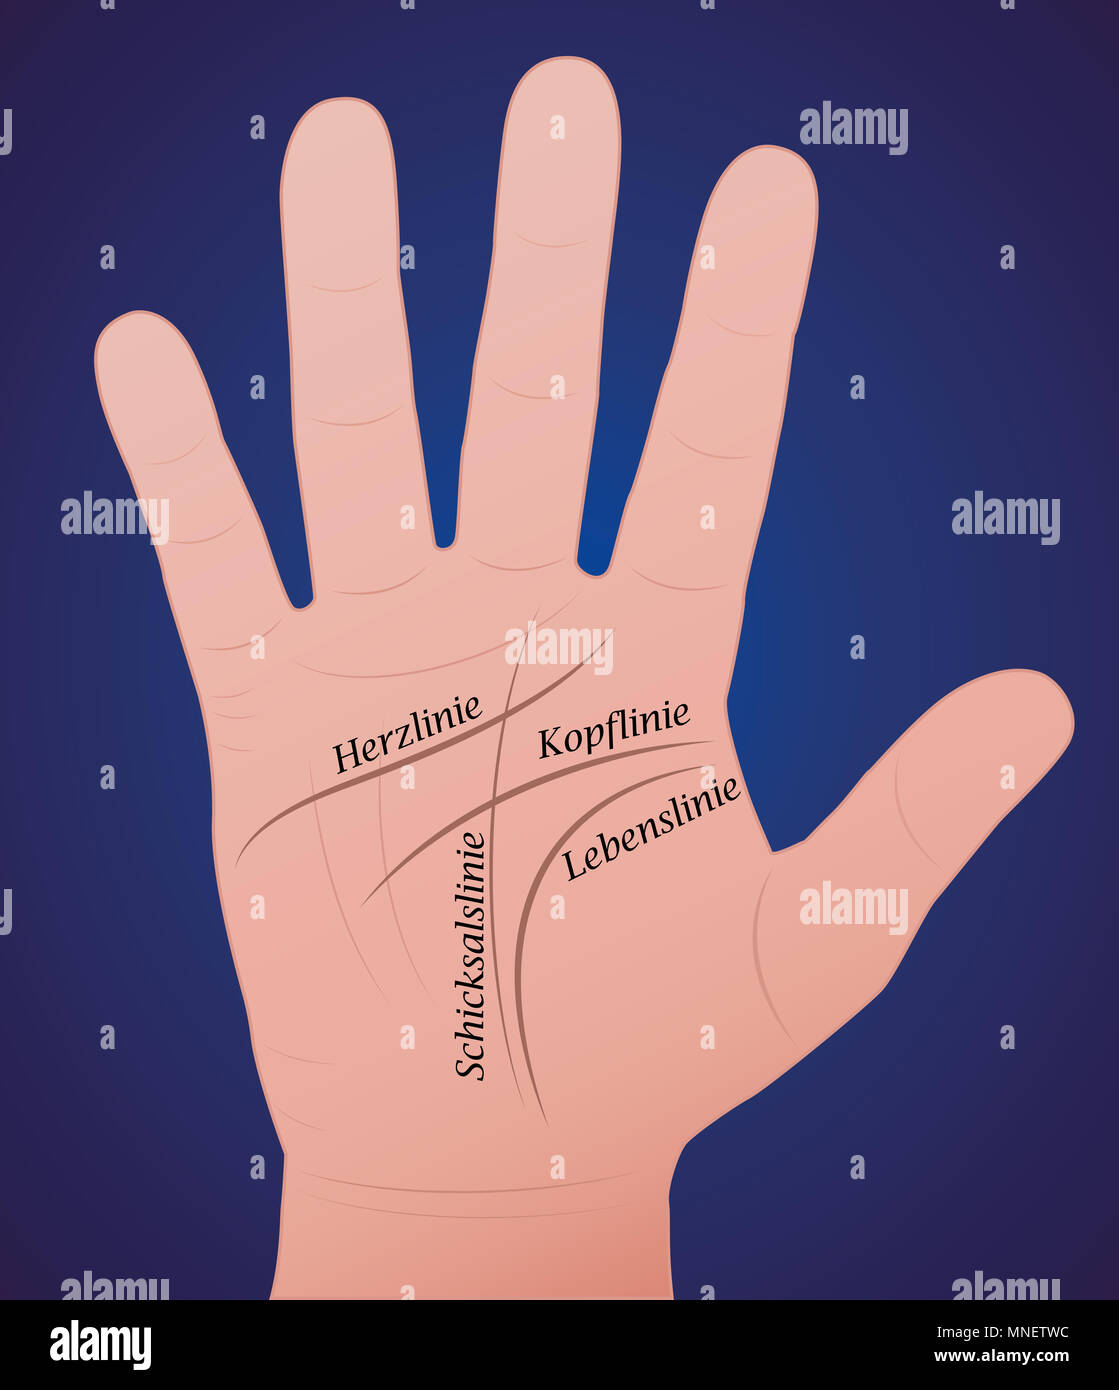 Palmistry, Meanings, Traits and Characteristics, Lines, Markings